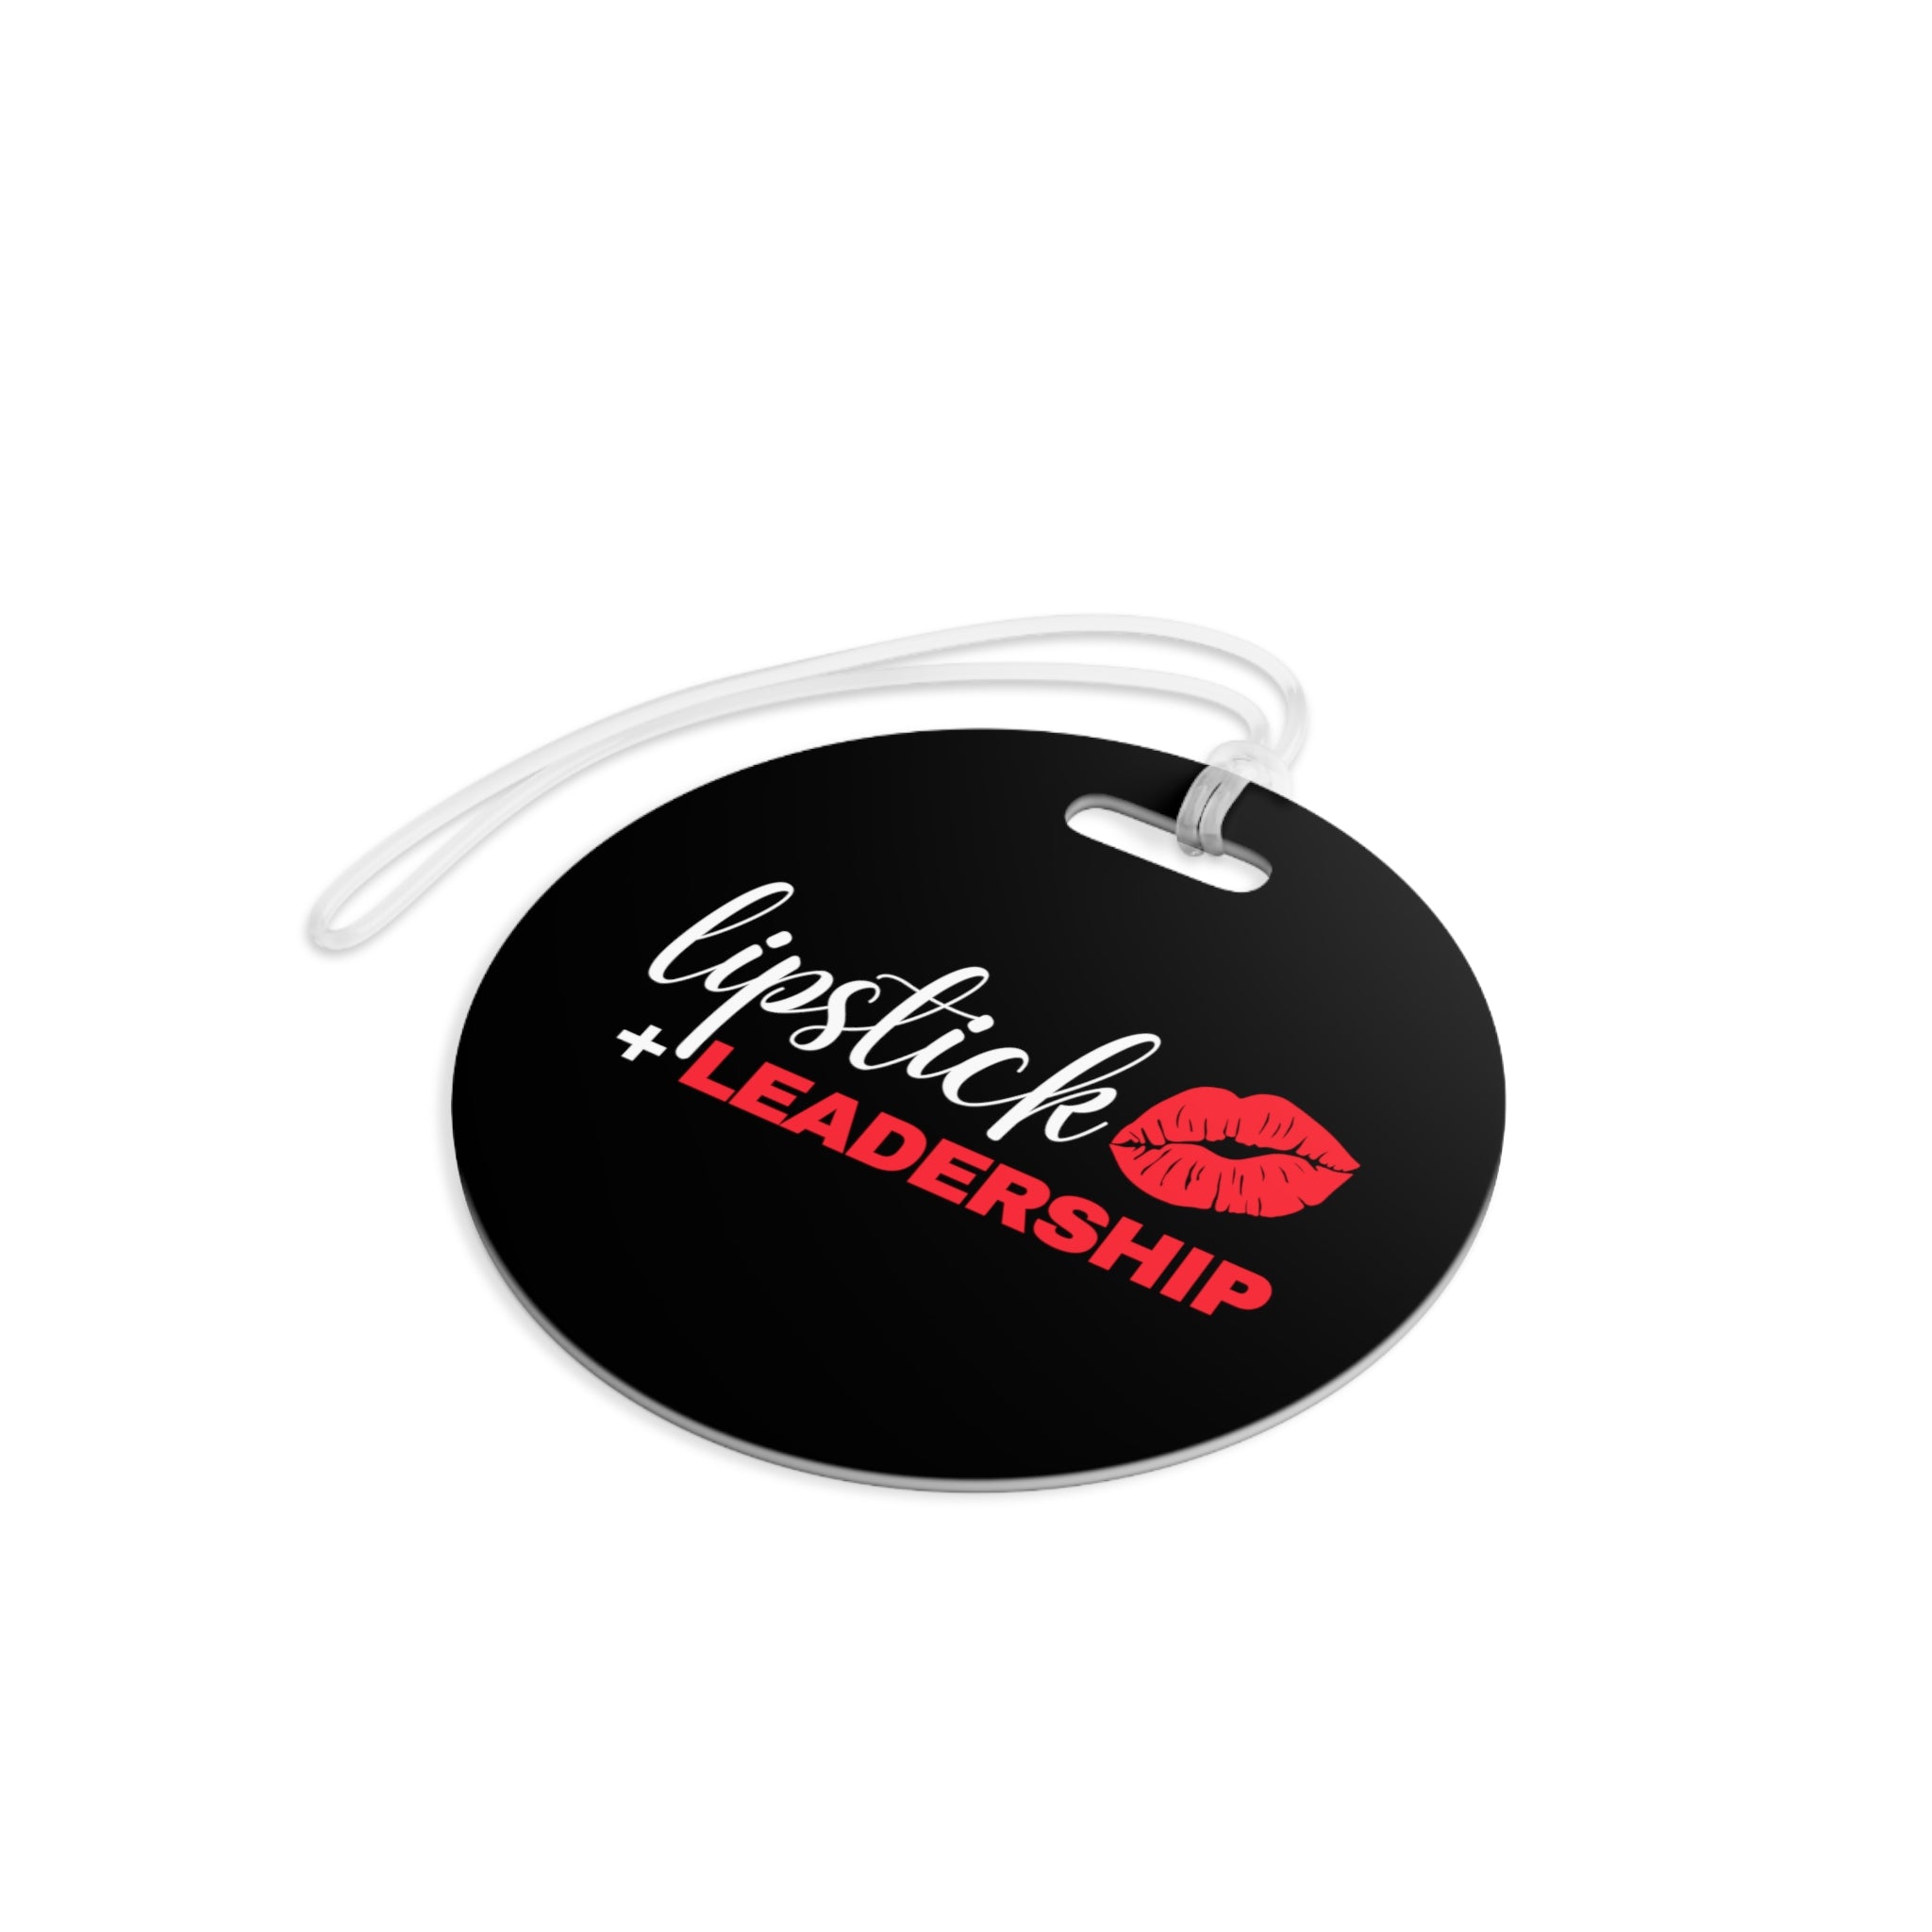 Lipstick + Leadership (Red Lips) Bag Tag, Makeup Lover Gift, Boss Babe Travel Tag Accessories  The Middle Aged Groove